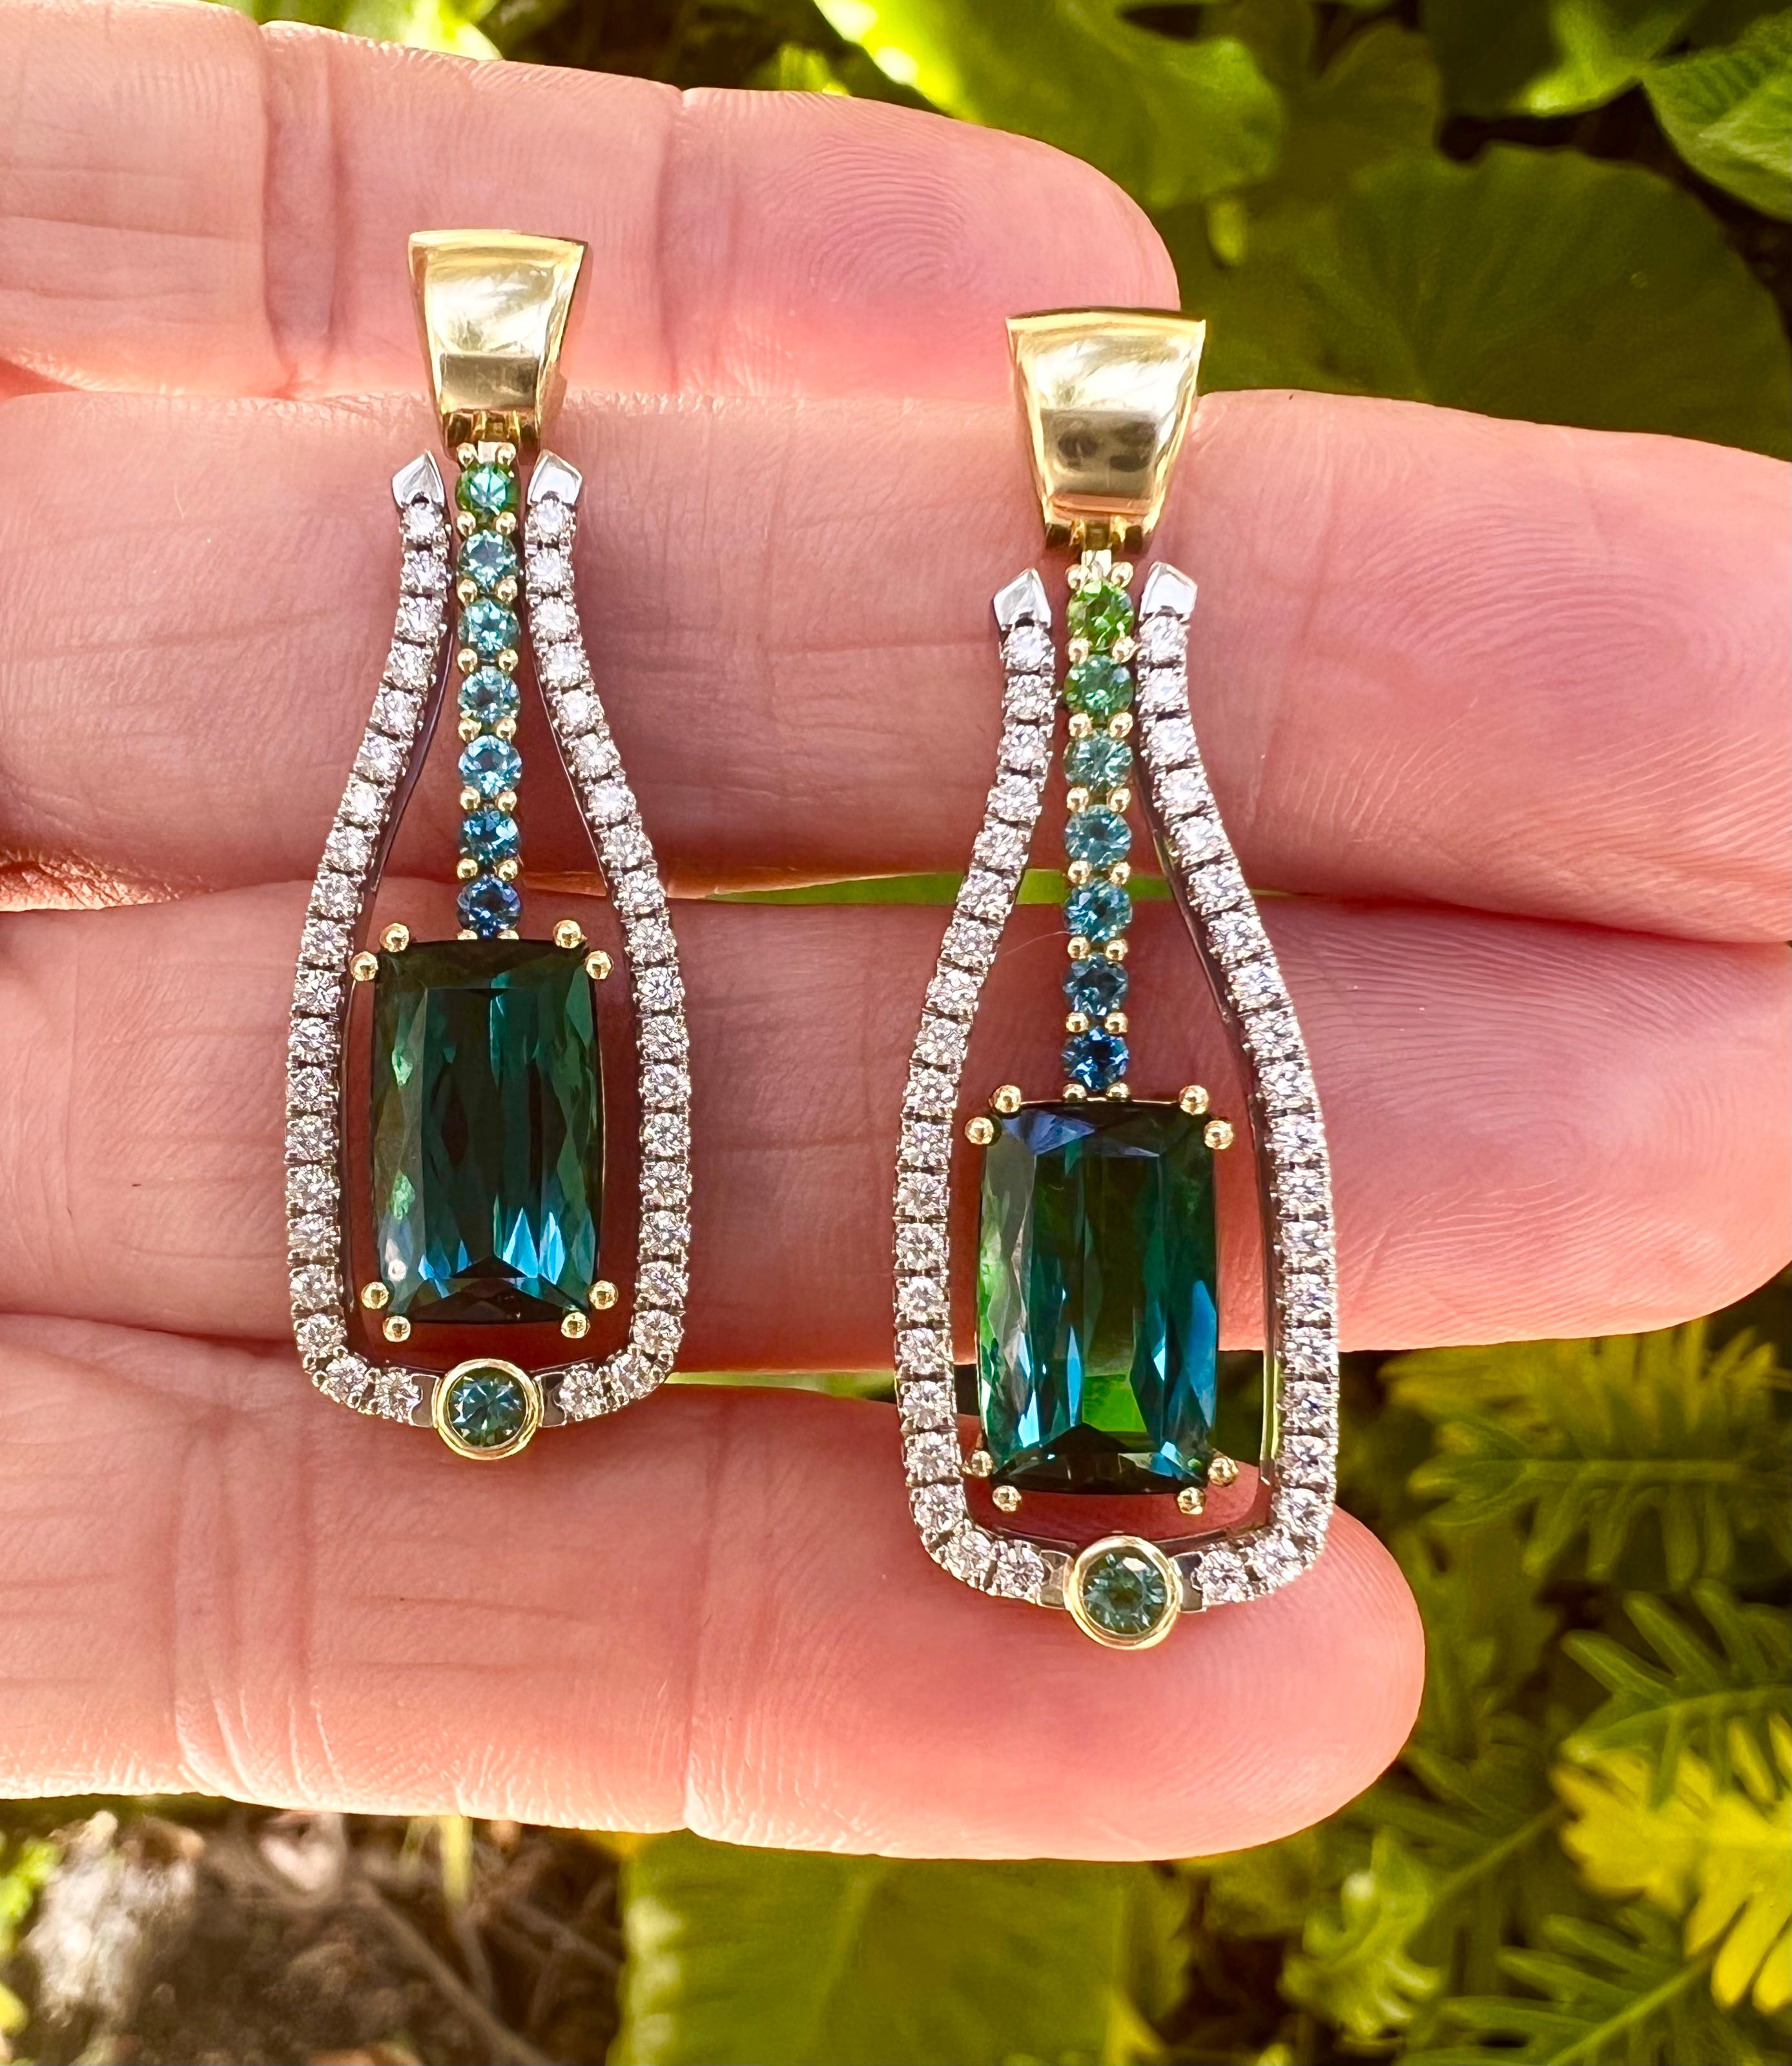 Vibrant green tourmaline and diamond drop earrings by Coffin & Trout, set in 18k two-tone white and yellow gold mountings.  Each earring top is of polished yellow gold tapered design with pierced posts and friction backs.  Central drops set with two